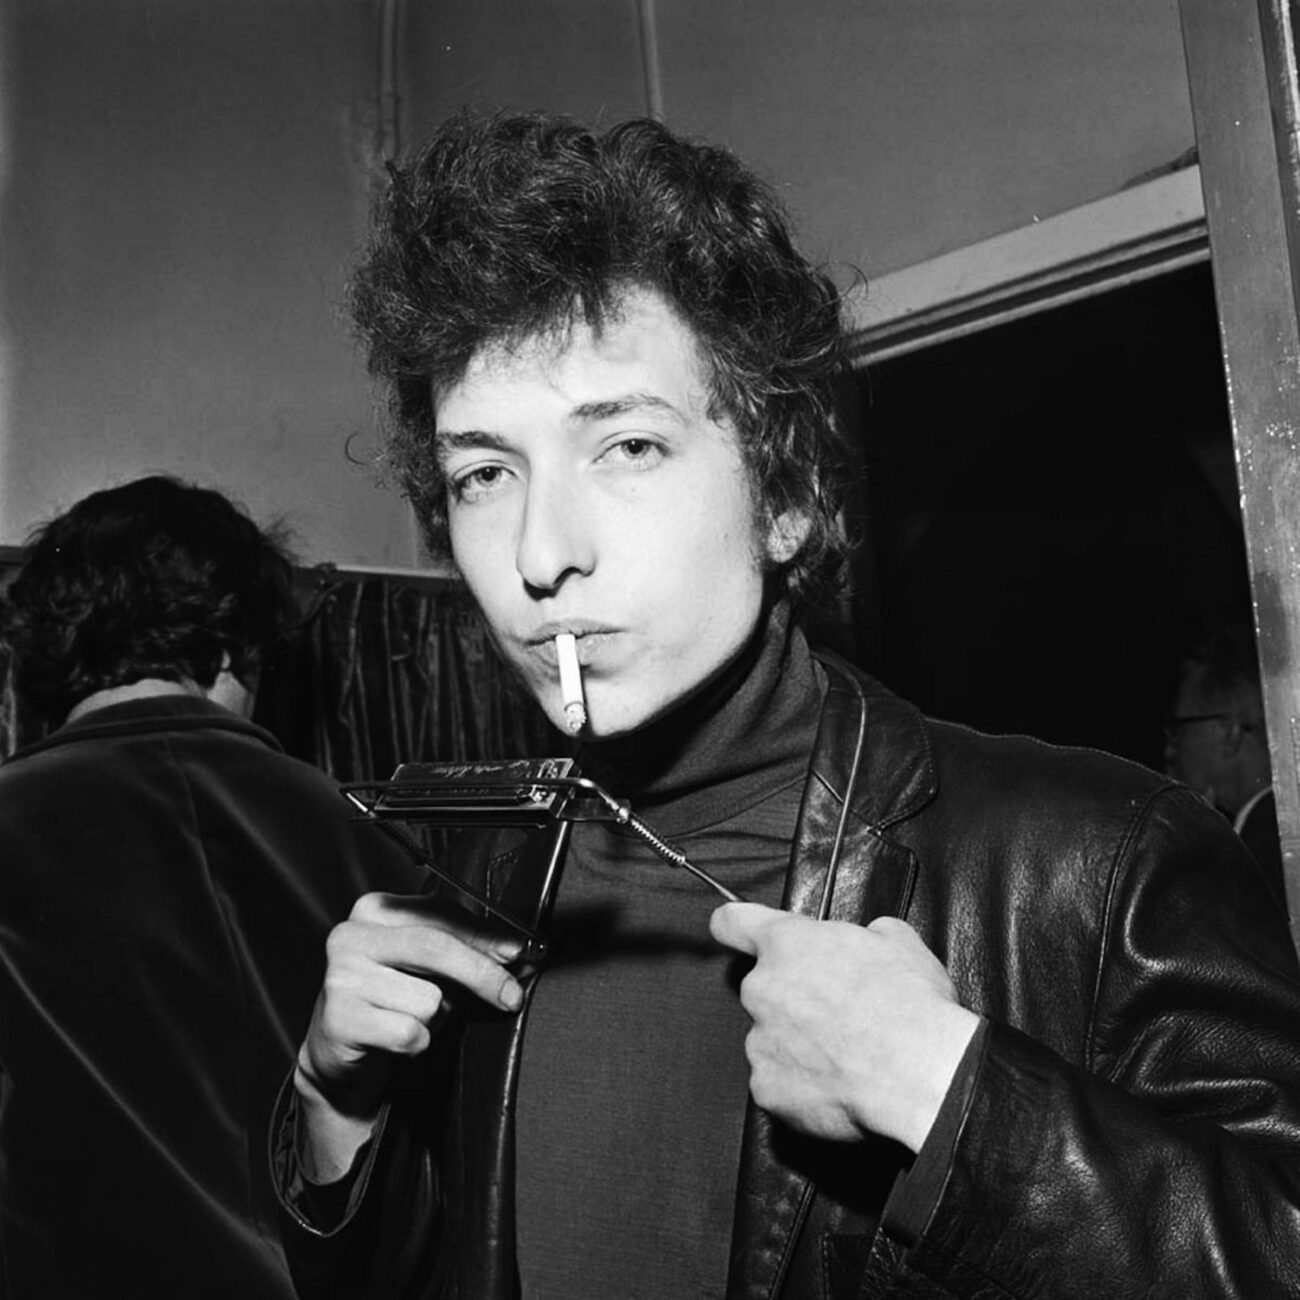 A recent lawsuit claims Bob Dylan sexually abused a twelve year old girl in 1965. If it's true, what will happen to the singer of 'Rough and Rowdy Ways'?